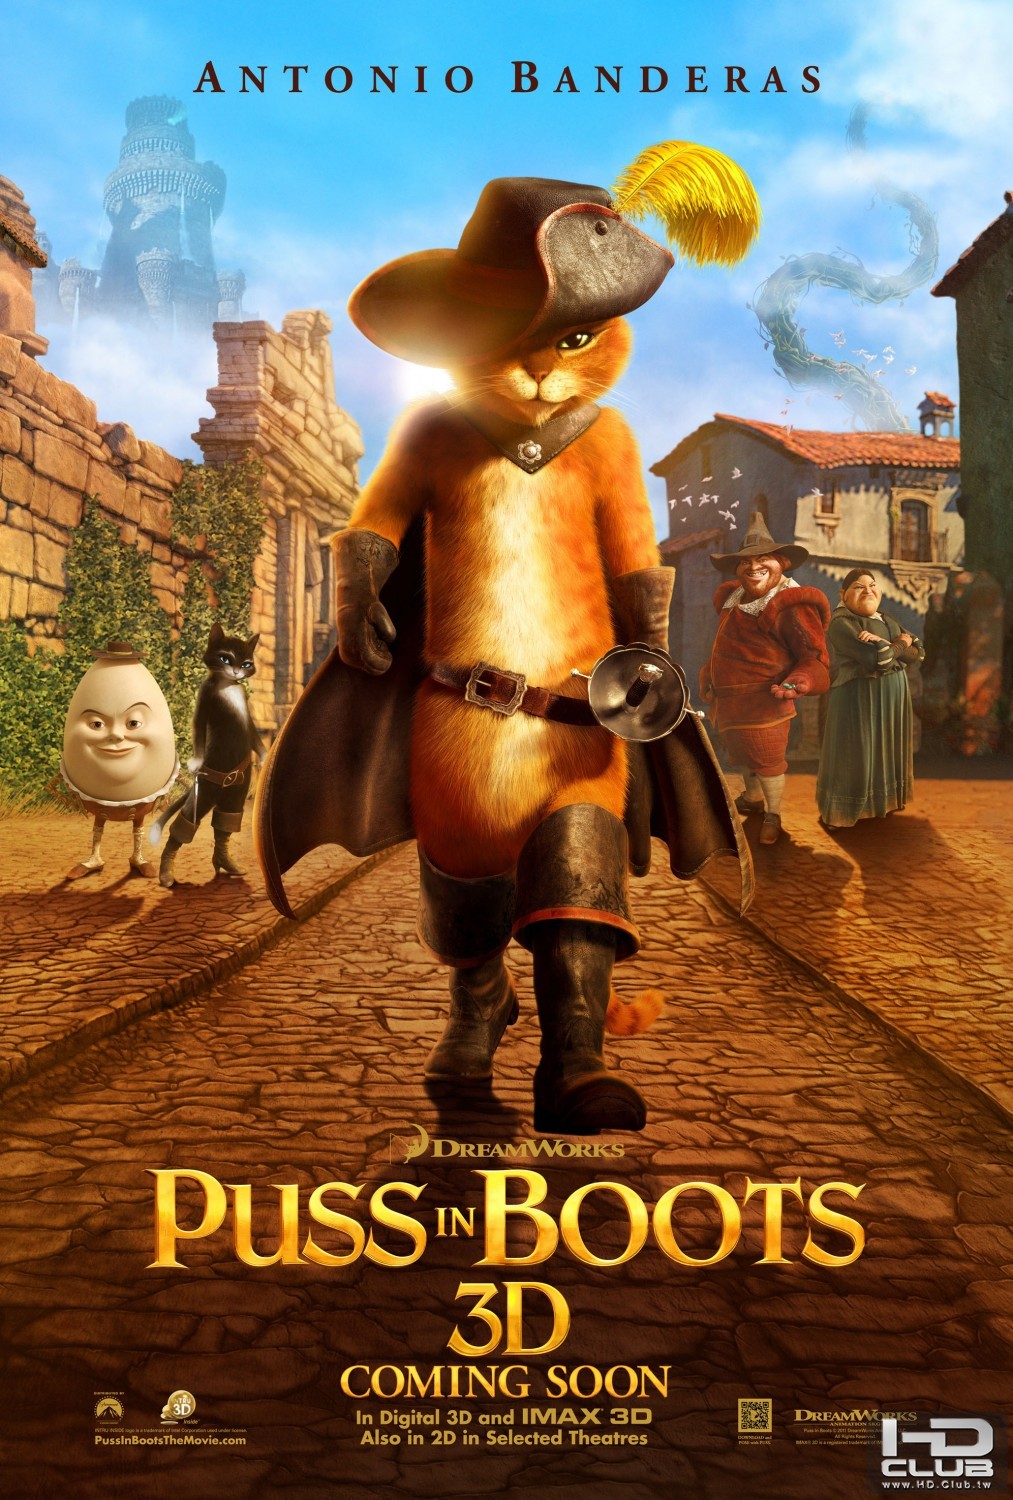 puss_in_boots_ver3_xlg.jpg